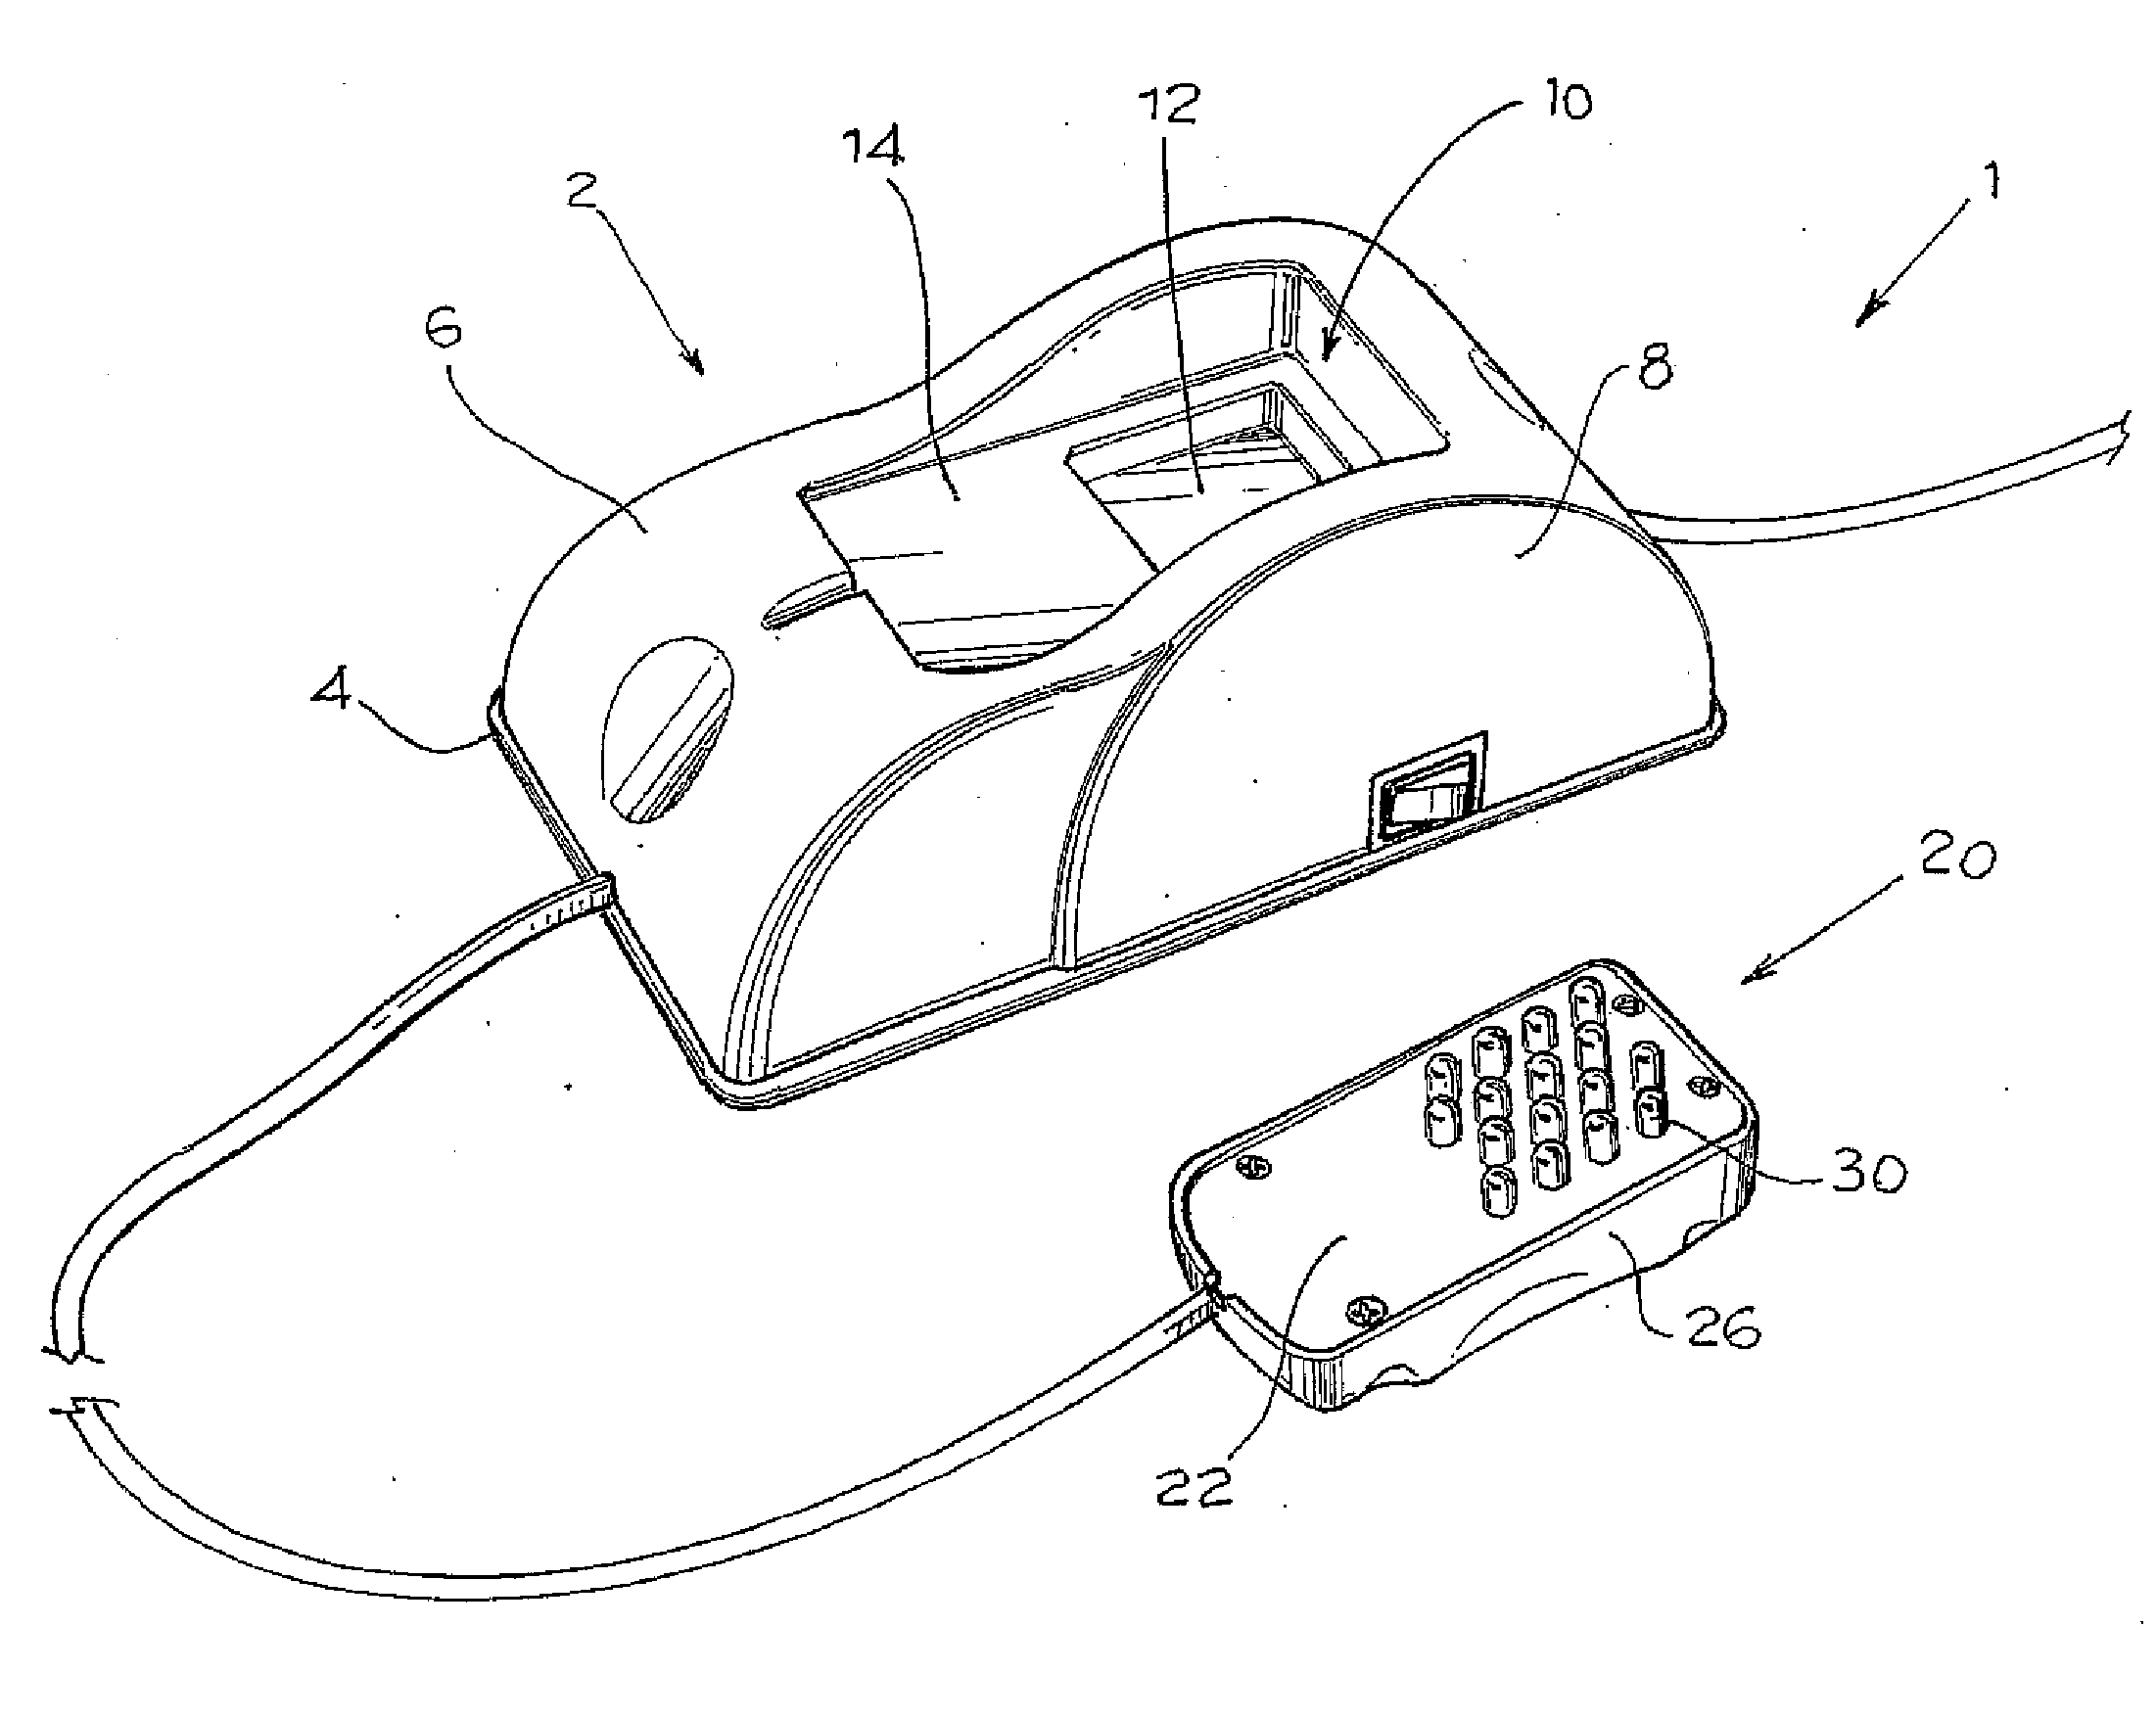 Device For Human Body Treatment By Electromagnetic Waves